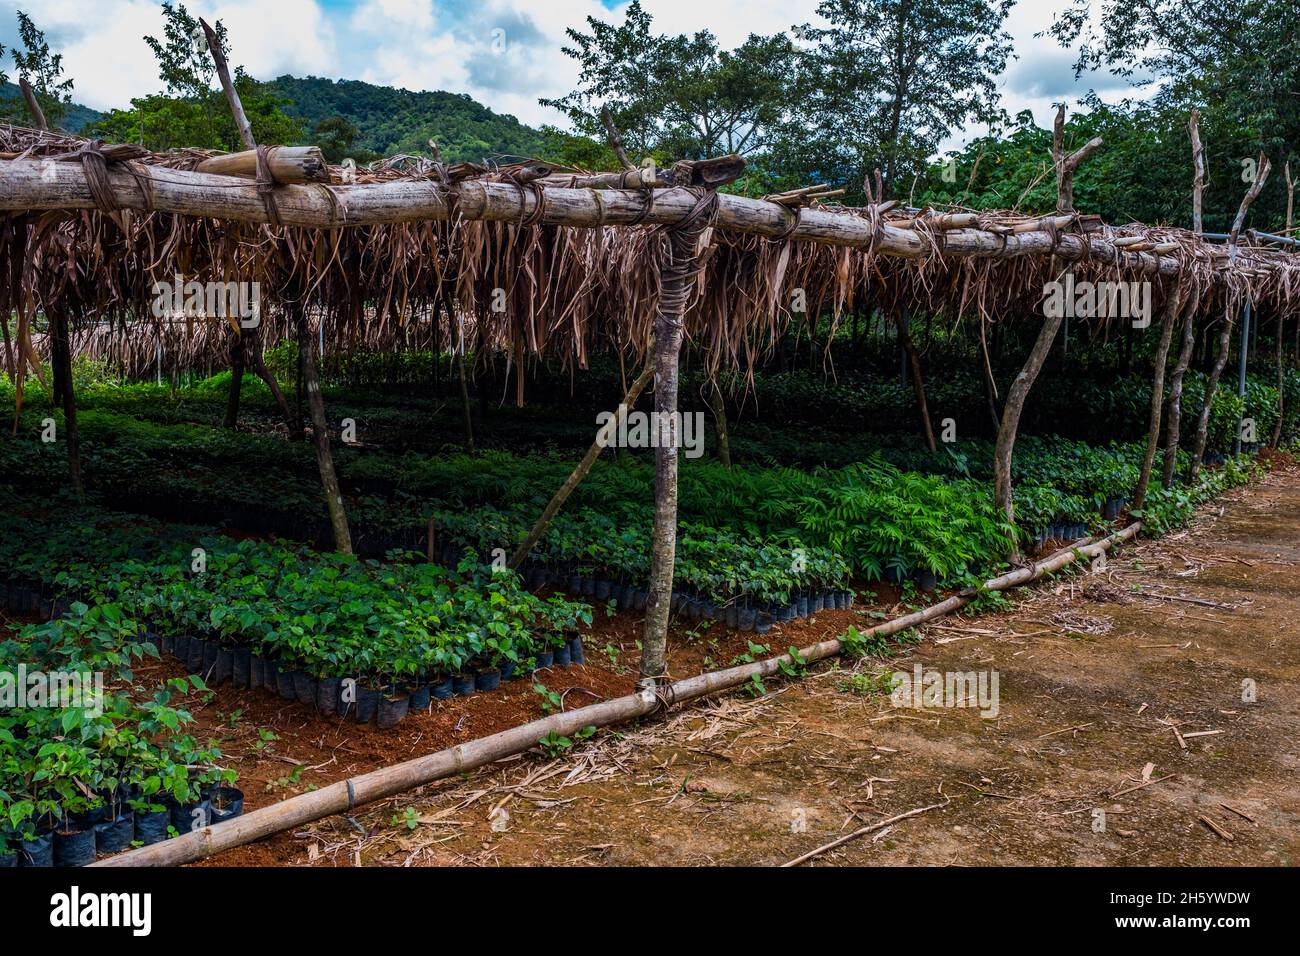 July 2017. The Kalahan Educational Foundation (KEF)'s nursey on the hill above town, grows seedlings, such as Nara, the national tree of the Philippines which is used for lumber and furniture, for reforestation and agroforestry through programs such as the National Greening program. Imugan, Nueva Vizcaya, Philippines. Stock Photo